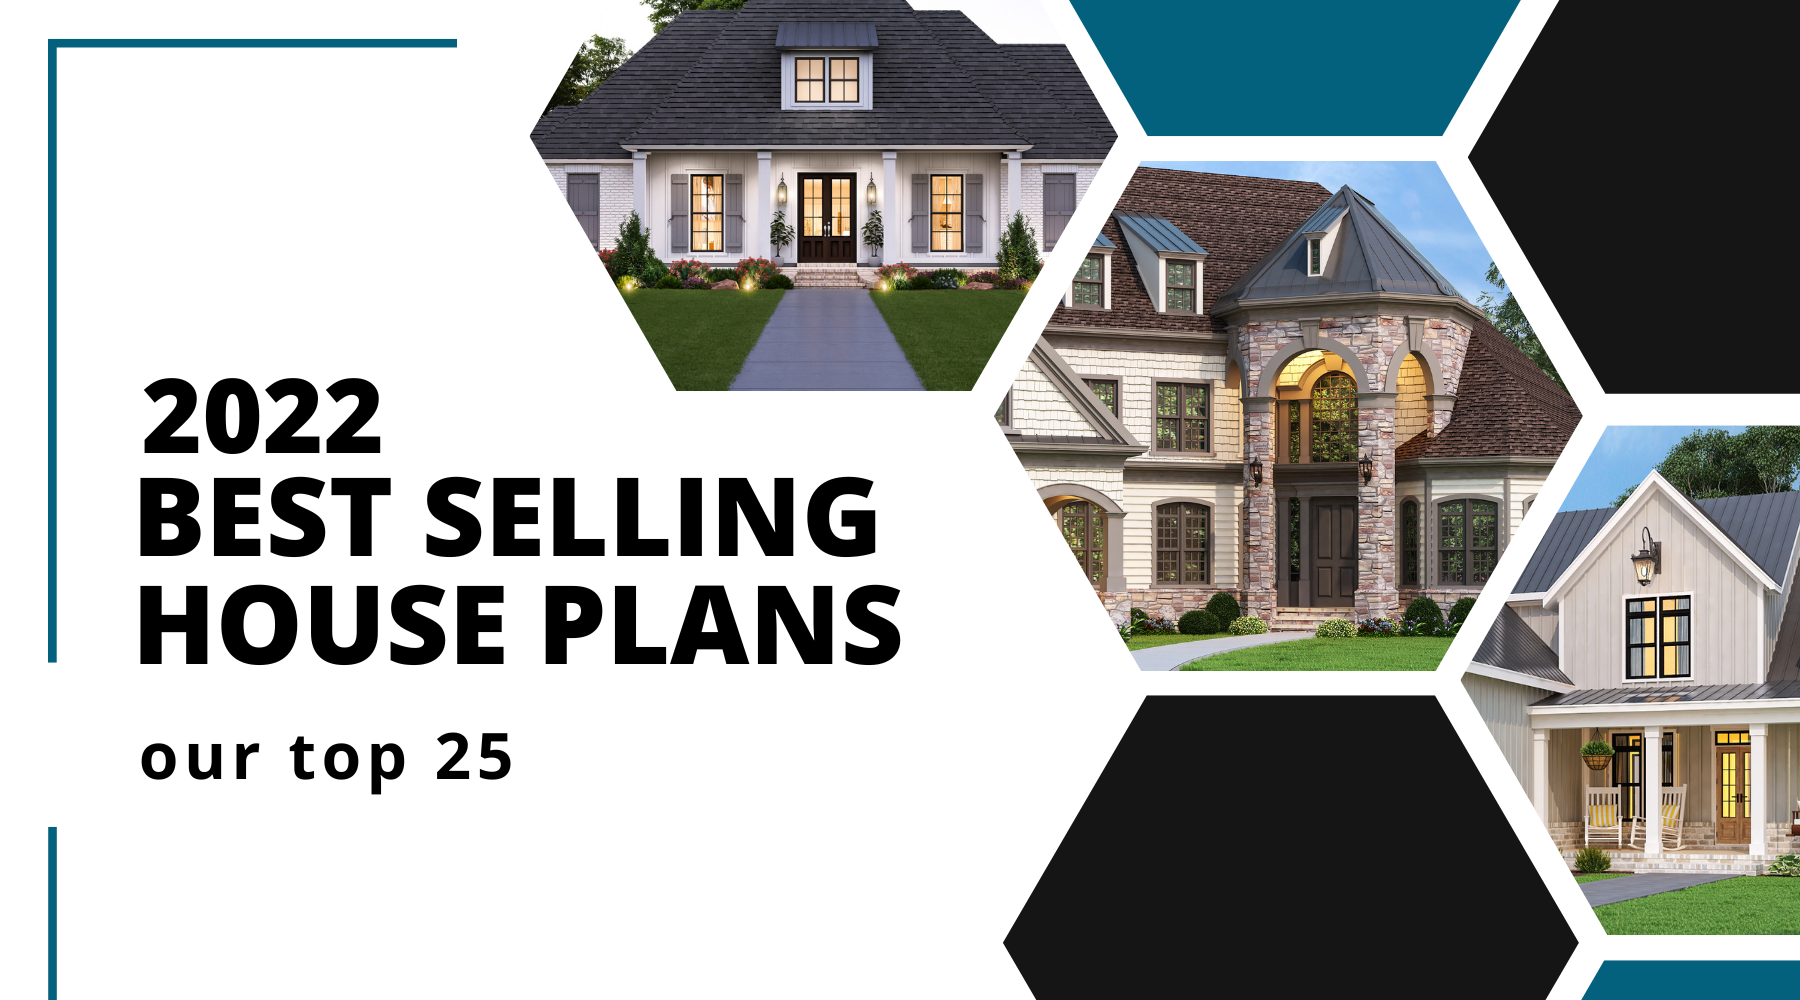 Best Selling House Plans: Our Top 25